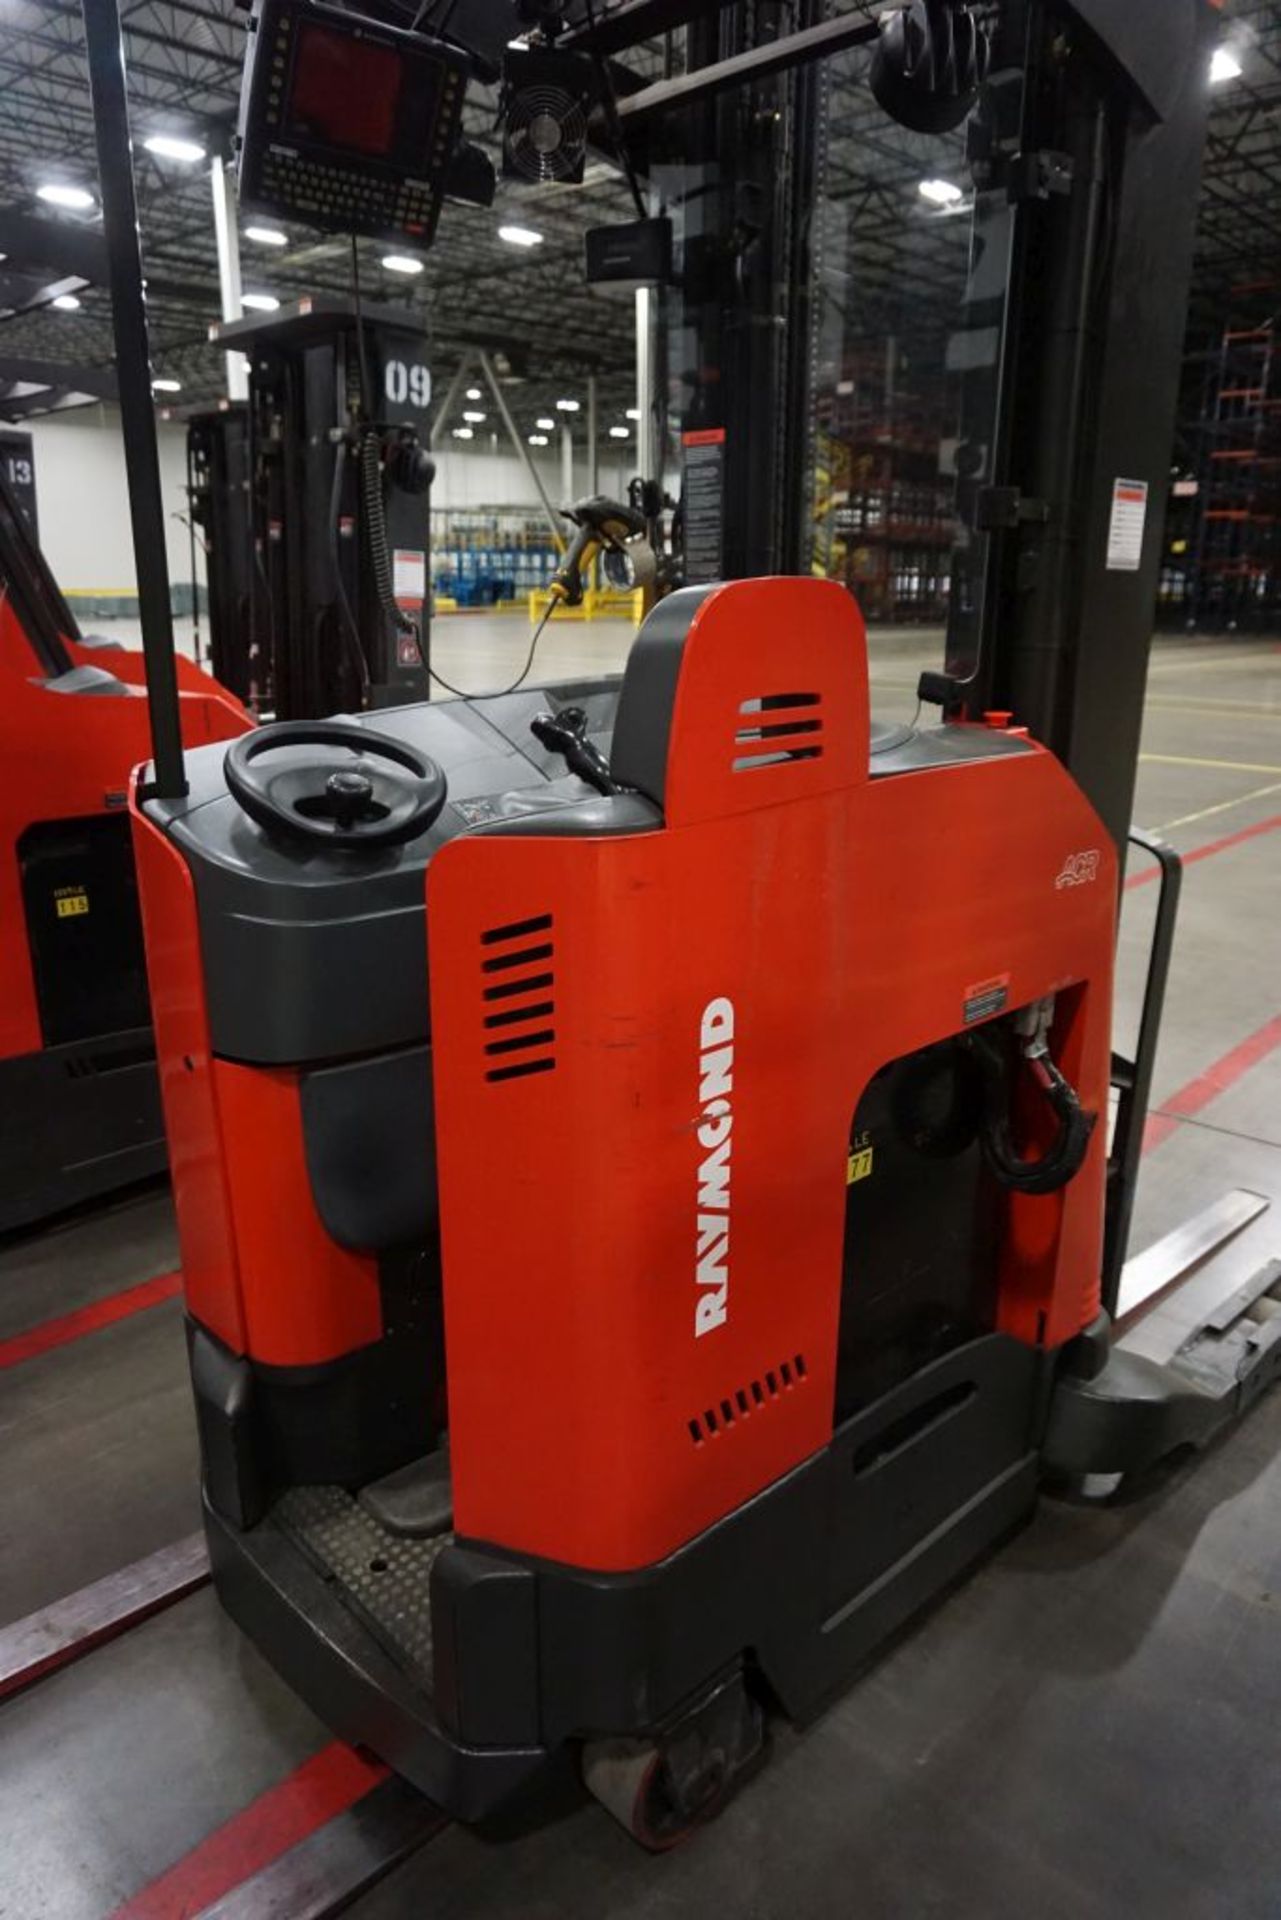 Raymond 7500 Universal Stance Reach Forklift - Model No. 750-R45TT; Serial No. 750-15-BC50725; - Image 8 of 19